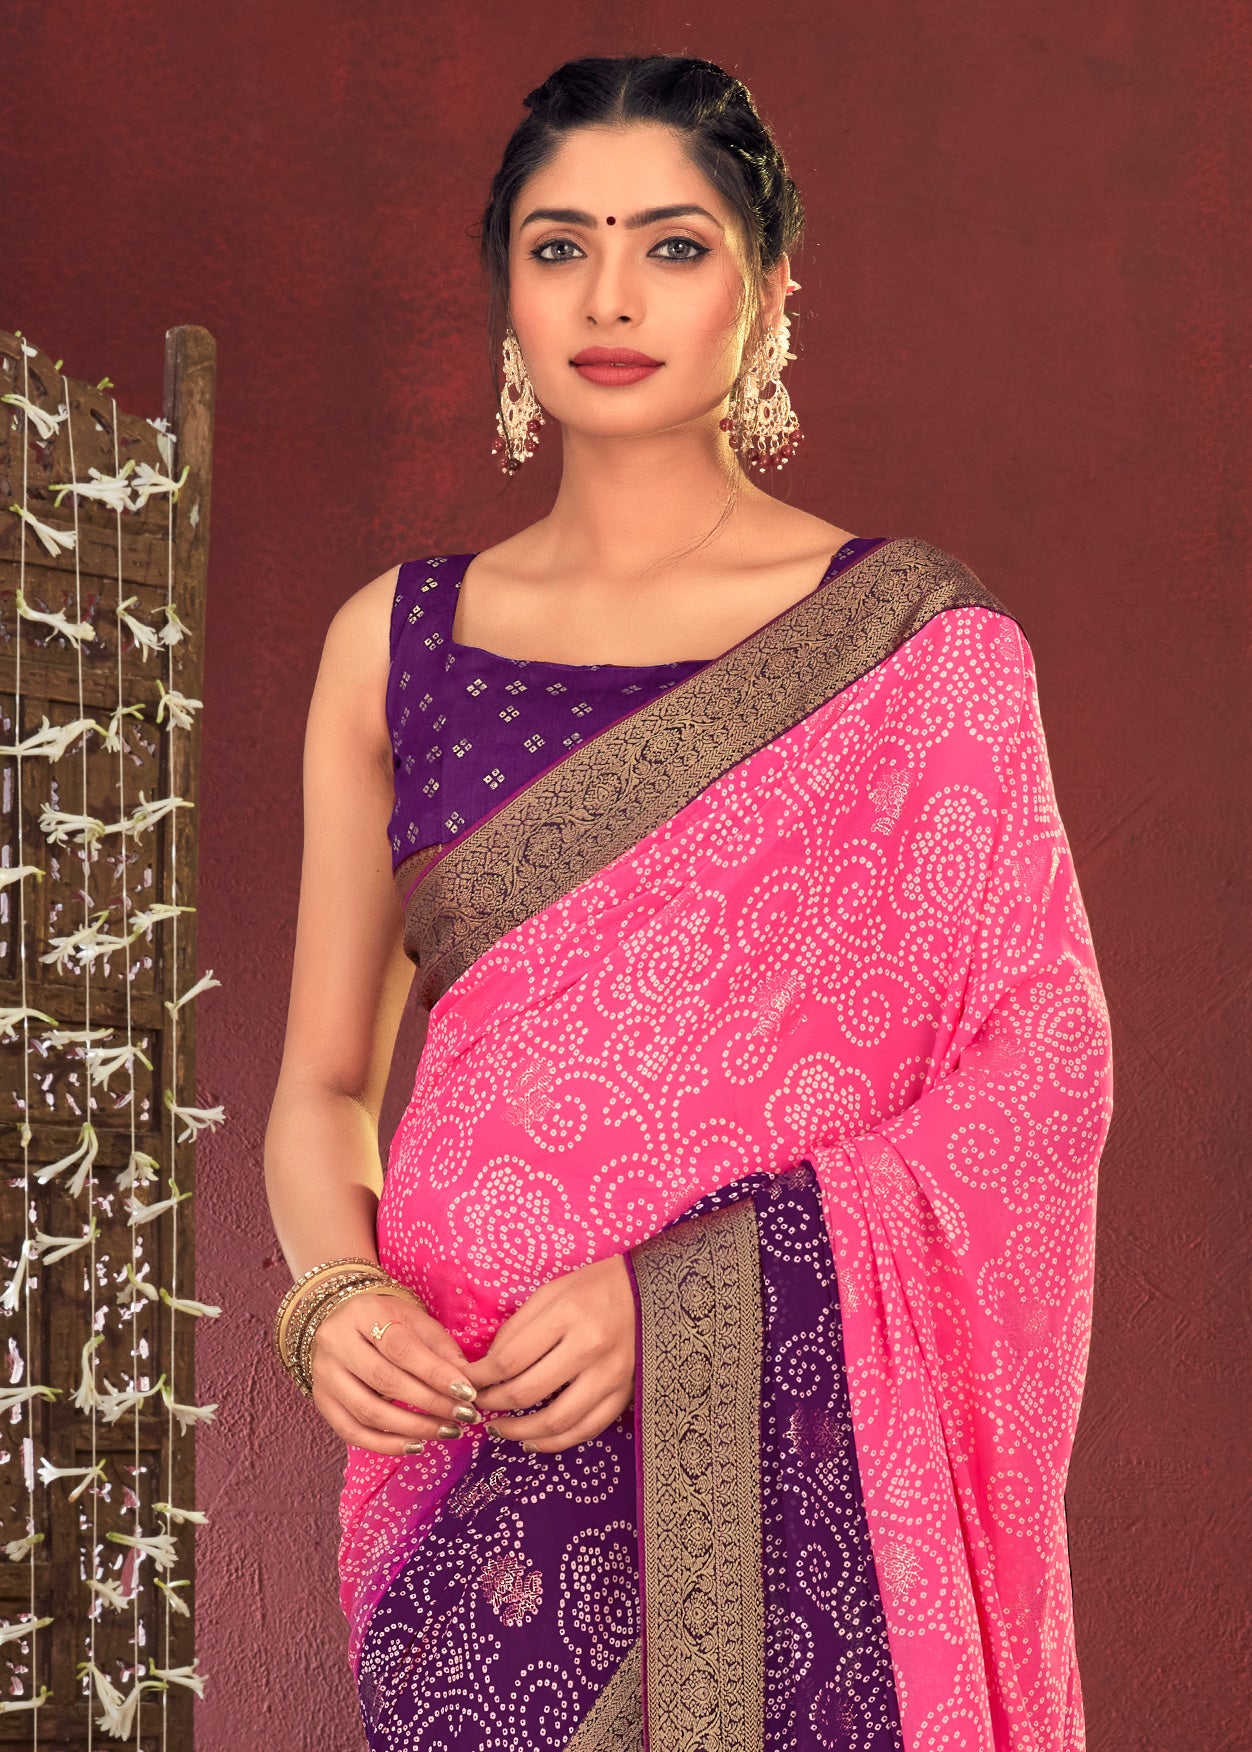 Dual Shades Bandhani Printed Purple Pink Weightless Georgette Saree With Embroidery Lace